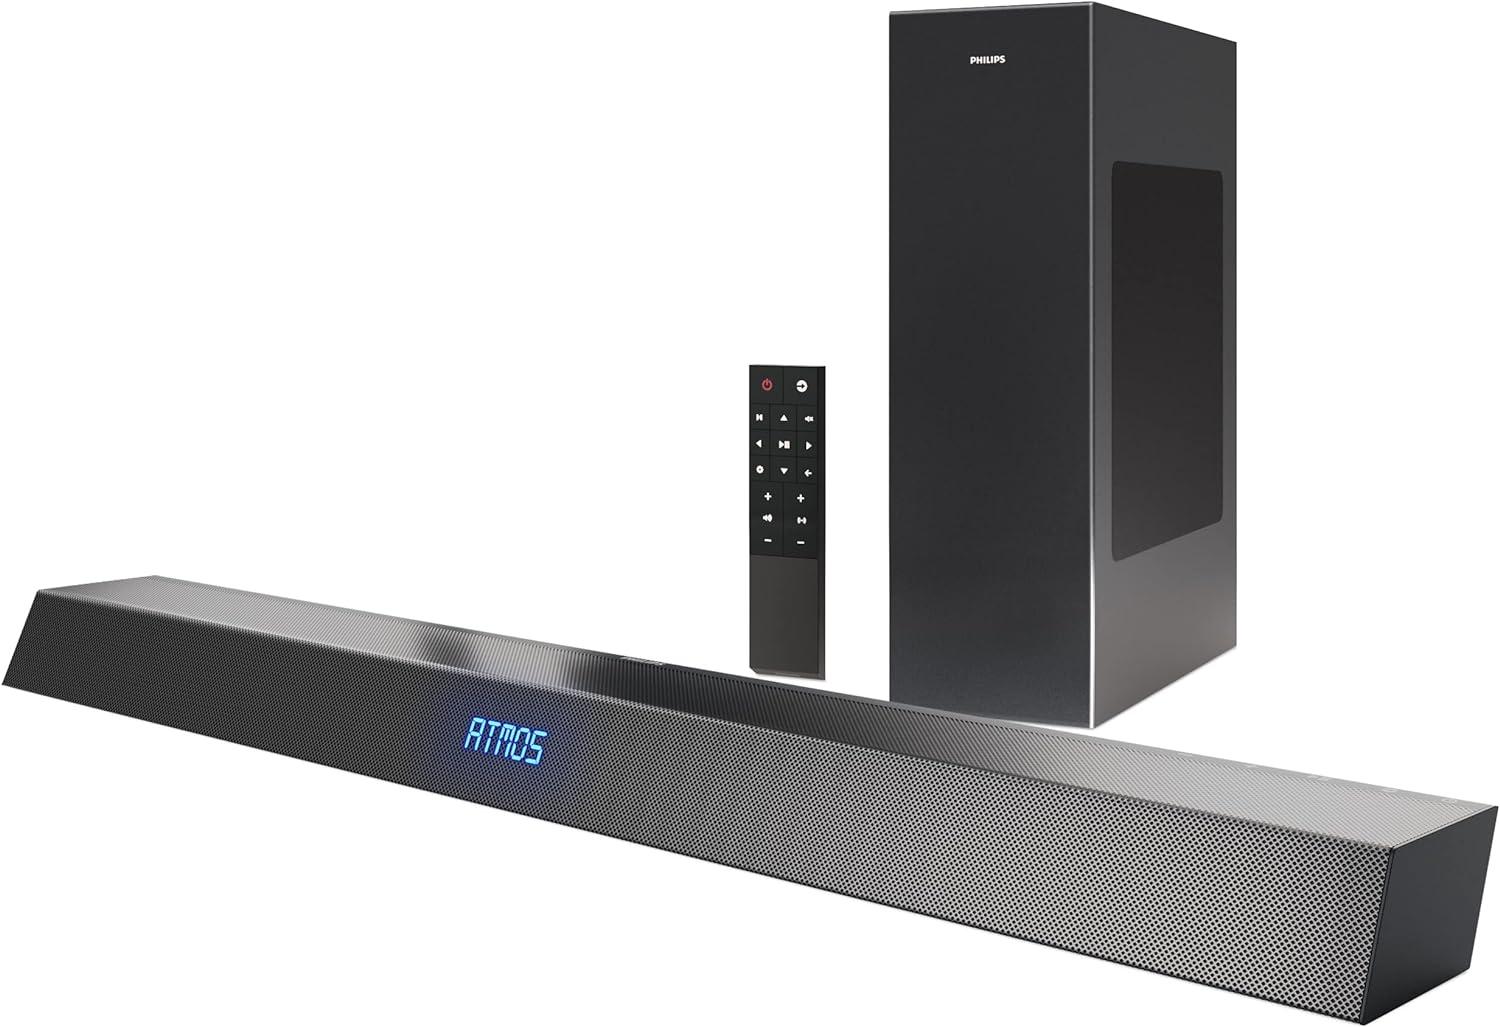 Philips Soundbar with Wireless Subwoofer for $149.99 Shipped